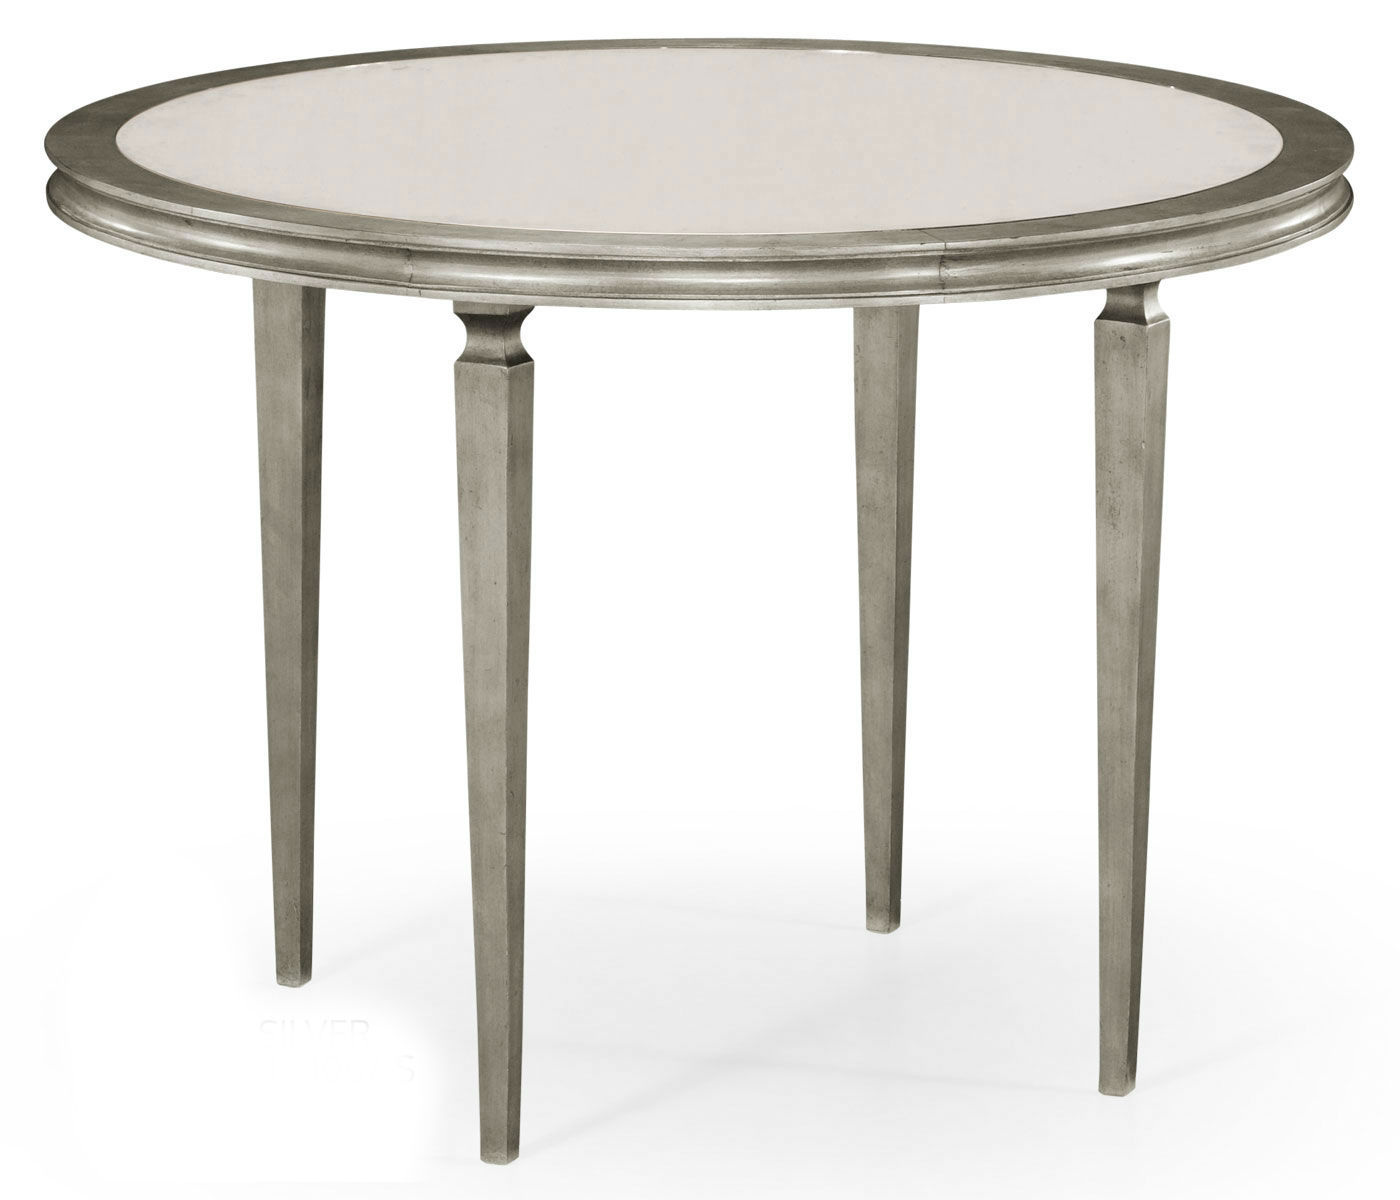 delightful unique small accent tables outdoor storage glass for room cabinet kijiji living and tall glas furniture decorative target white gold ott bench modern threshold round